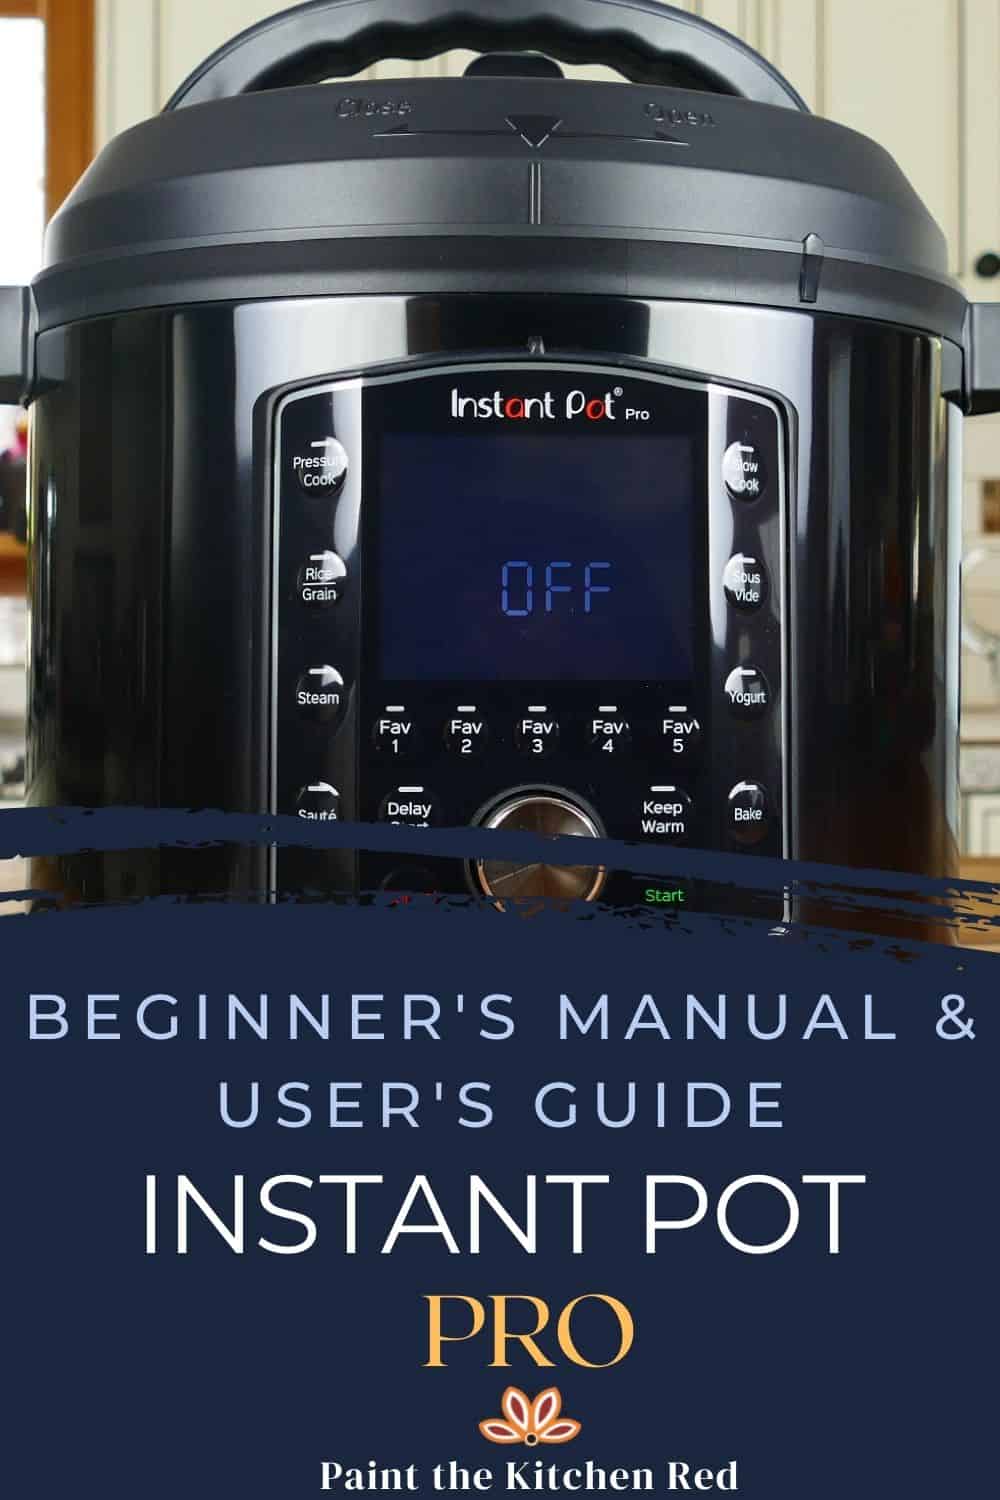 Beginner's manual and user's guide - Instant Pot Pro - Paint the Kitchen Red